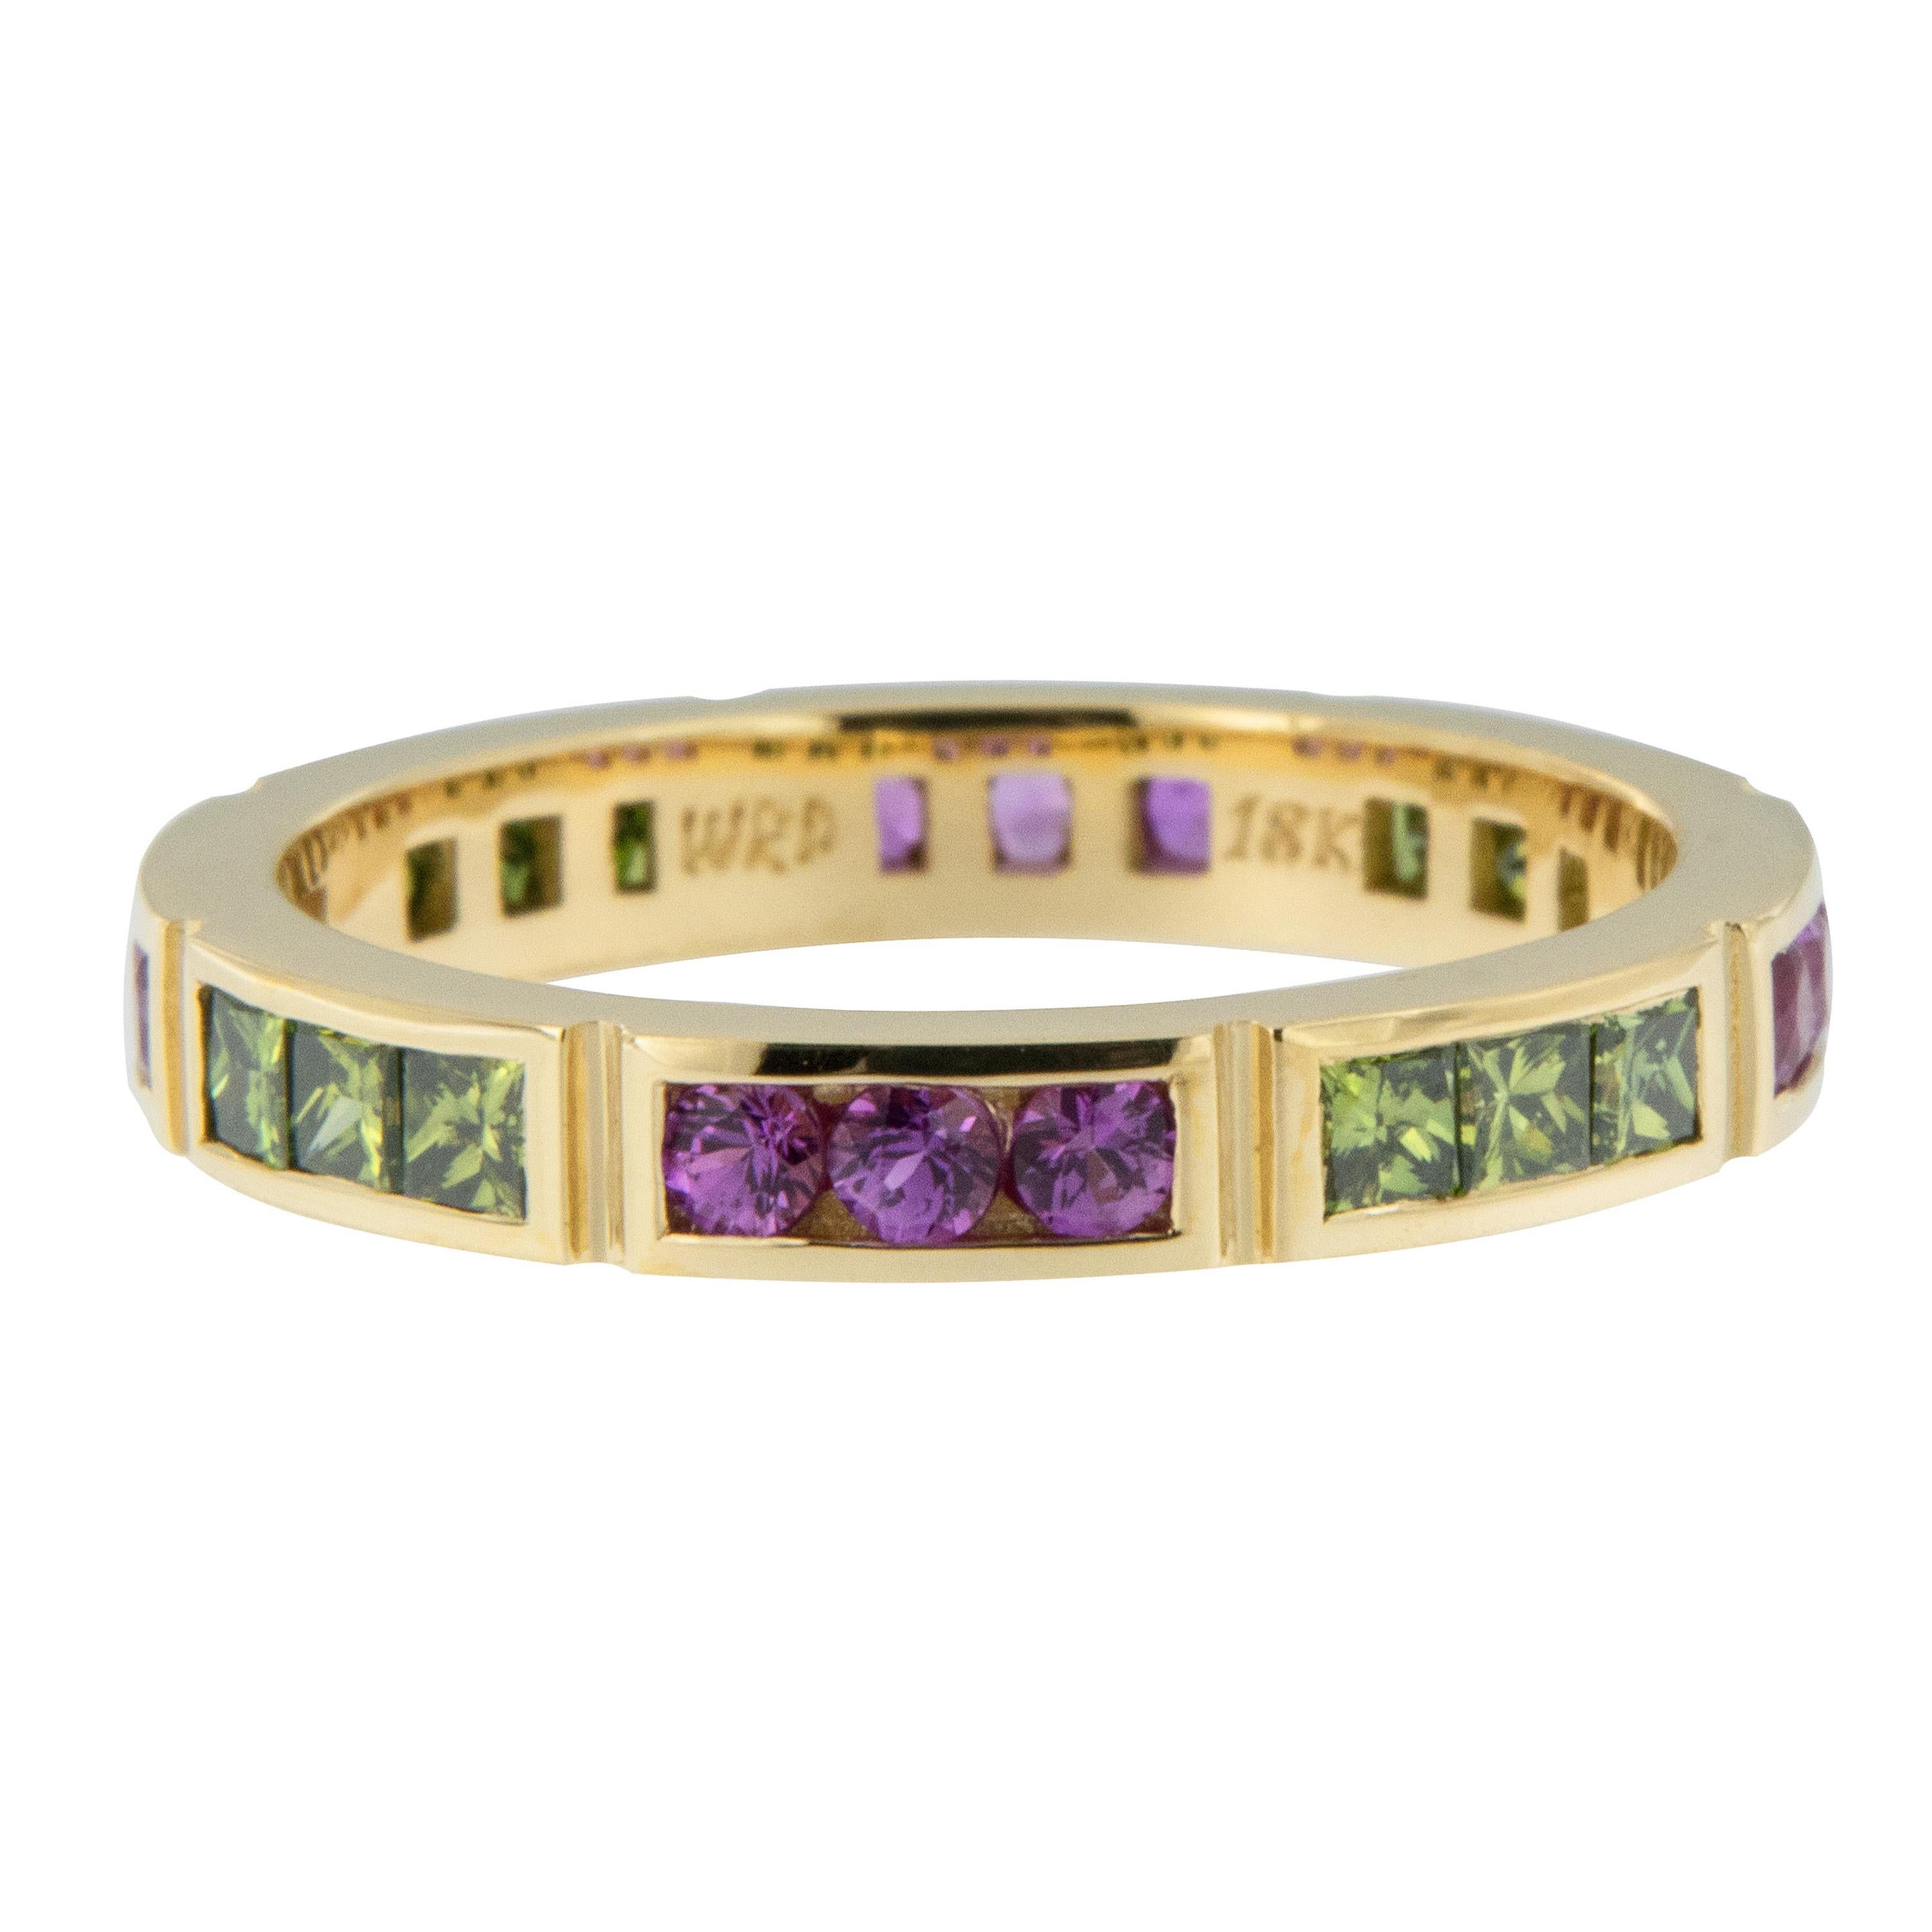 Complimentary pink & green colors set this segmented eternity ring apart from all others! Expertly hand fabricated eternity band by William Rosenberg made from rich 18 karat yellow gold with 0.54 Cttw pink sapphires & 0.63 Cttw treated green